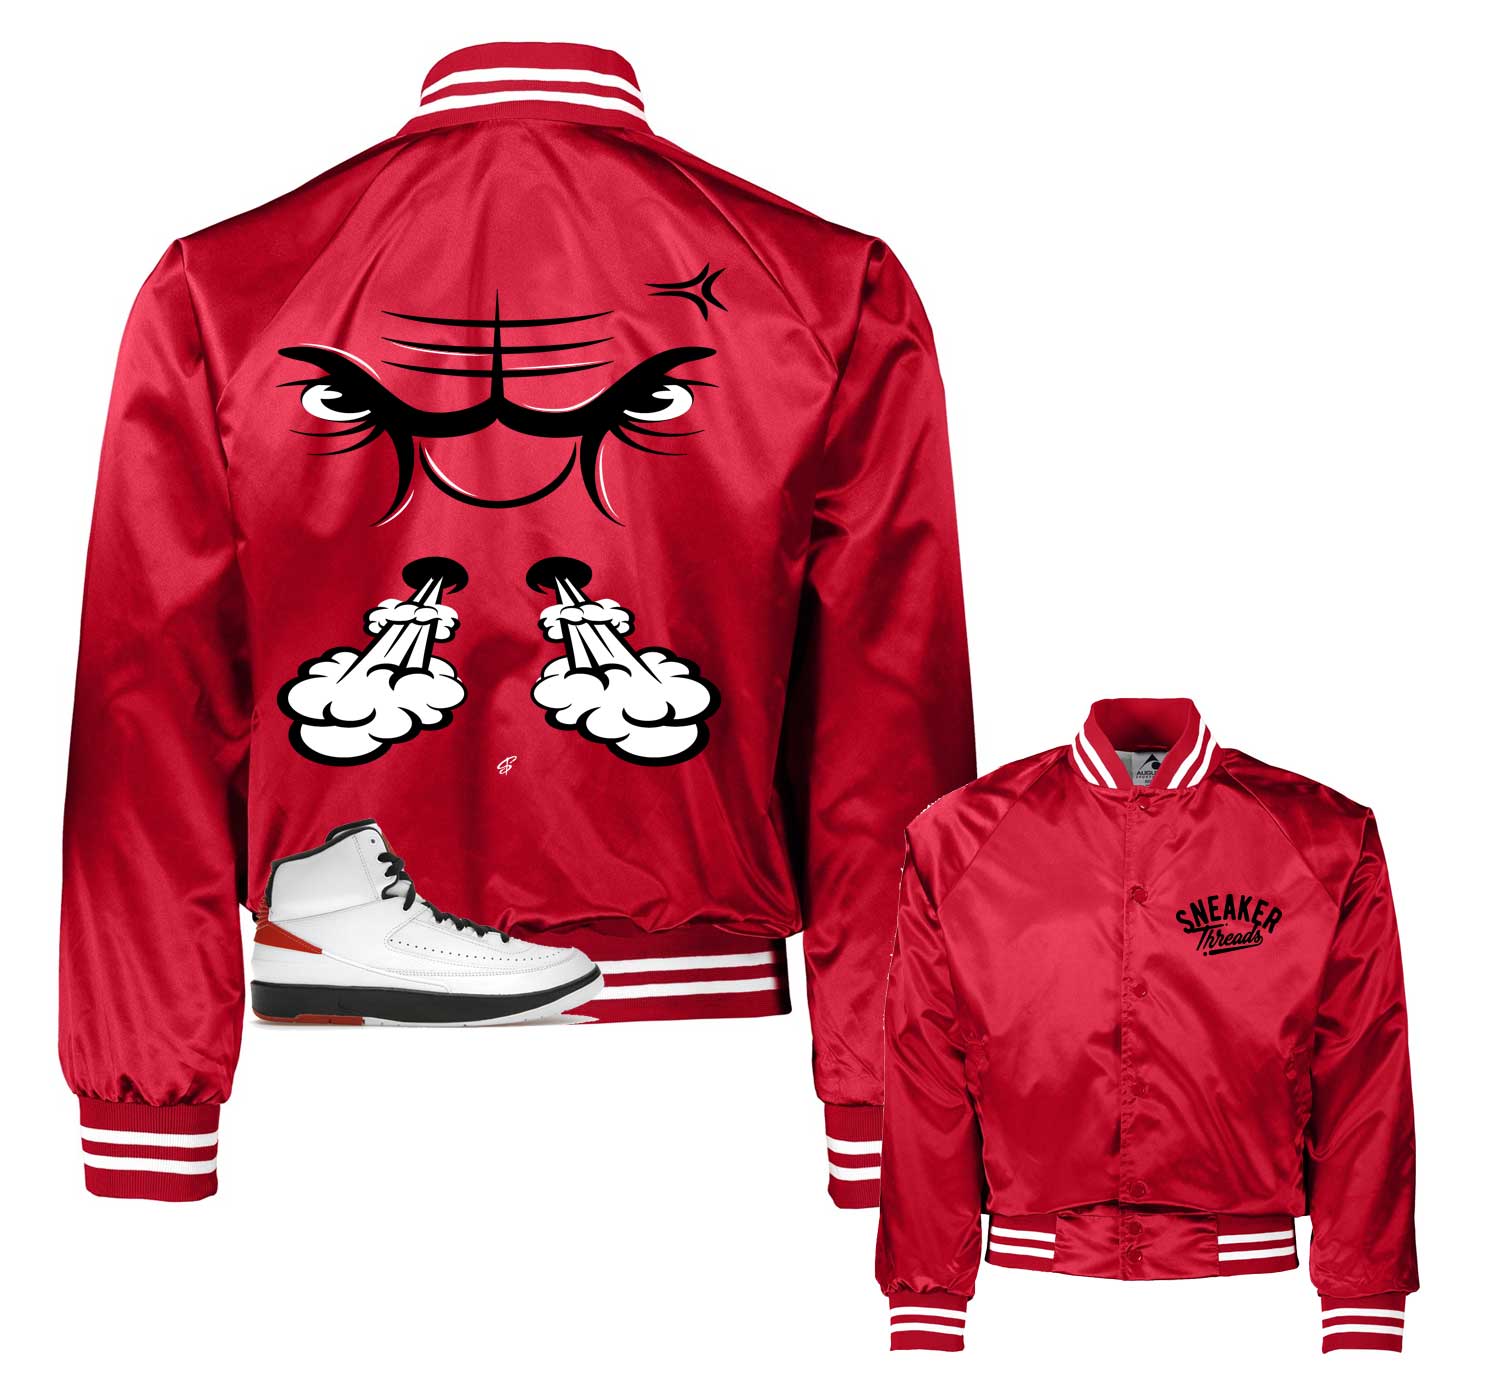 Retro 2 Chicago Satin Jacket - Raging Face - Red